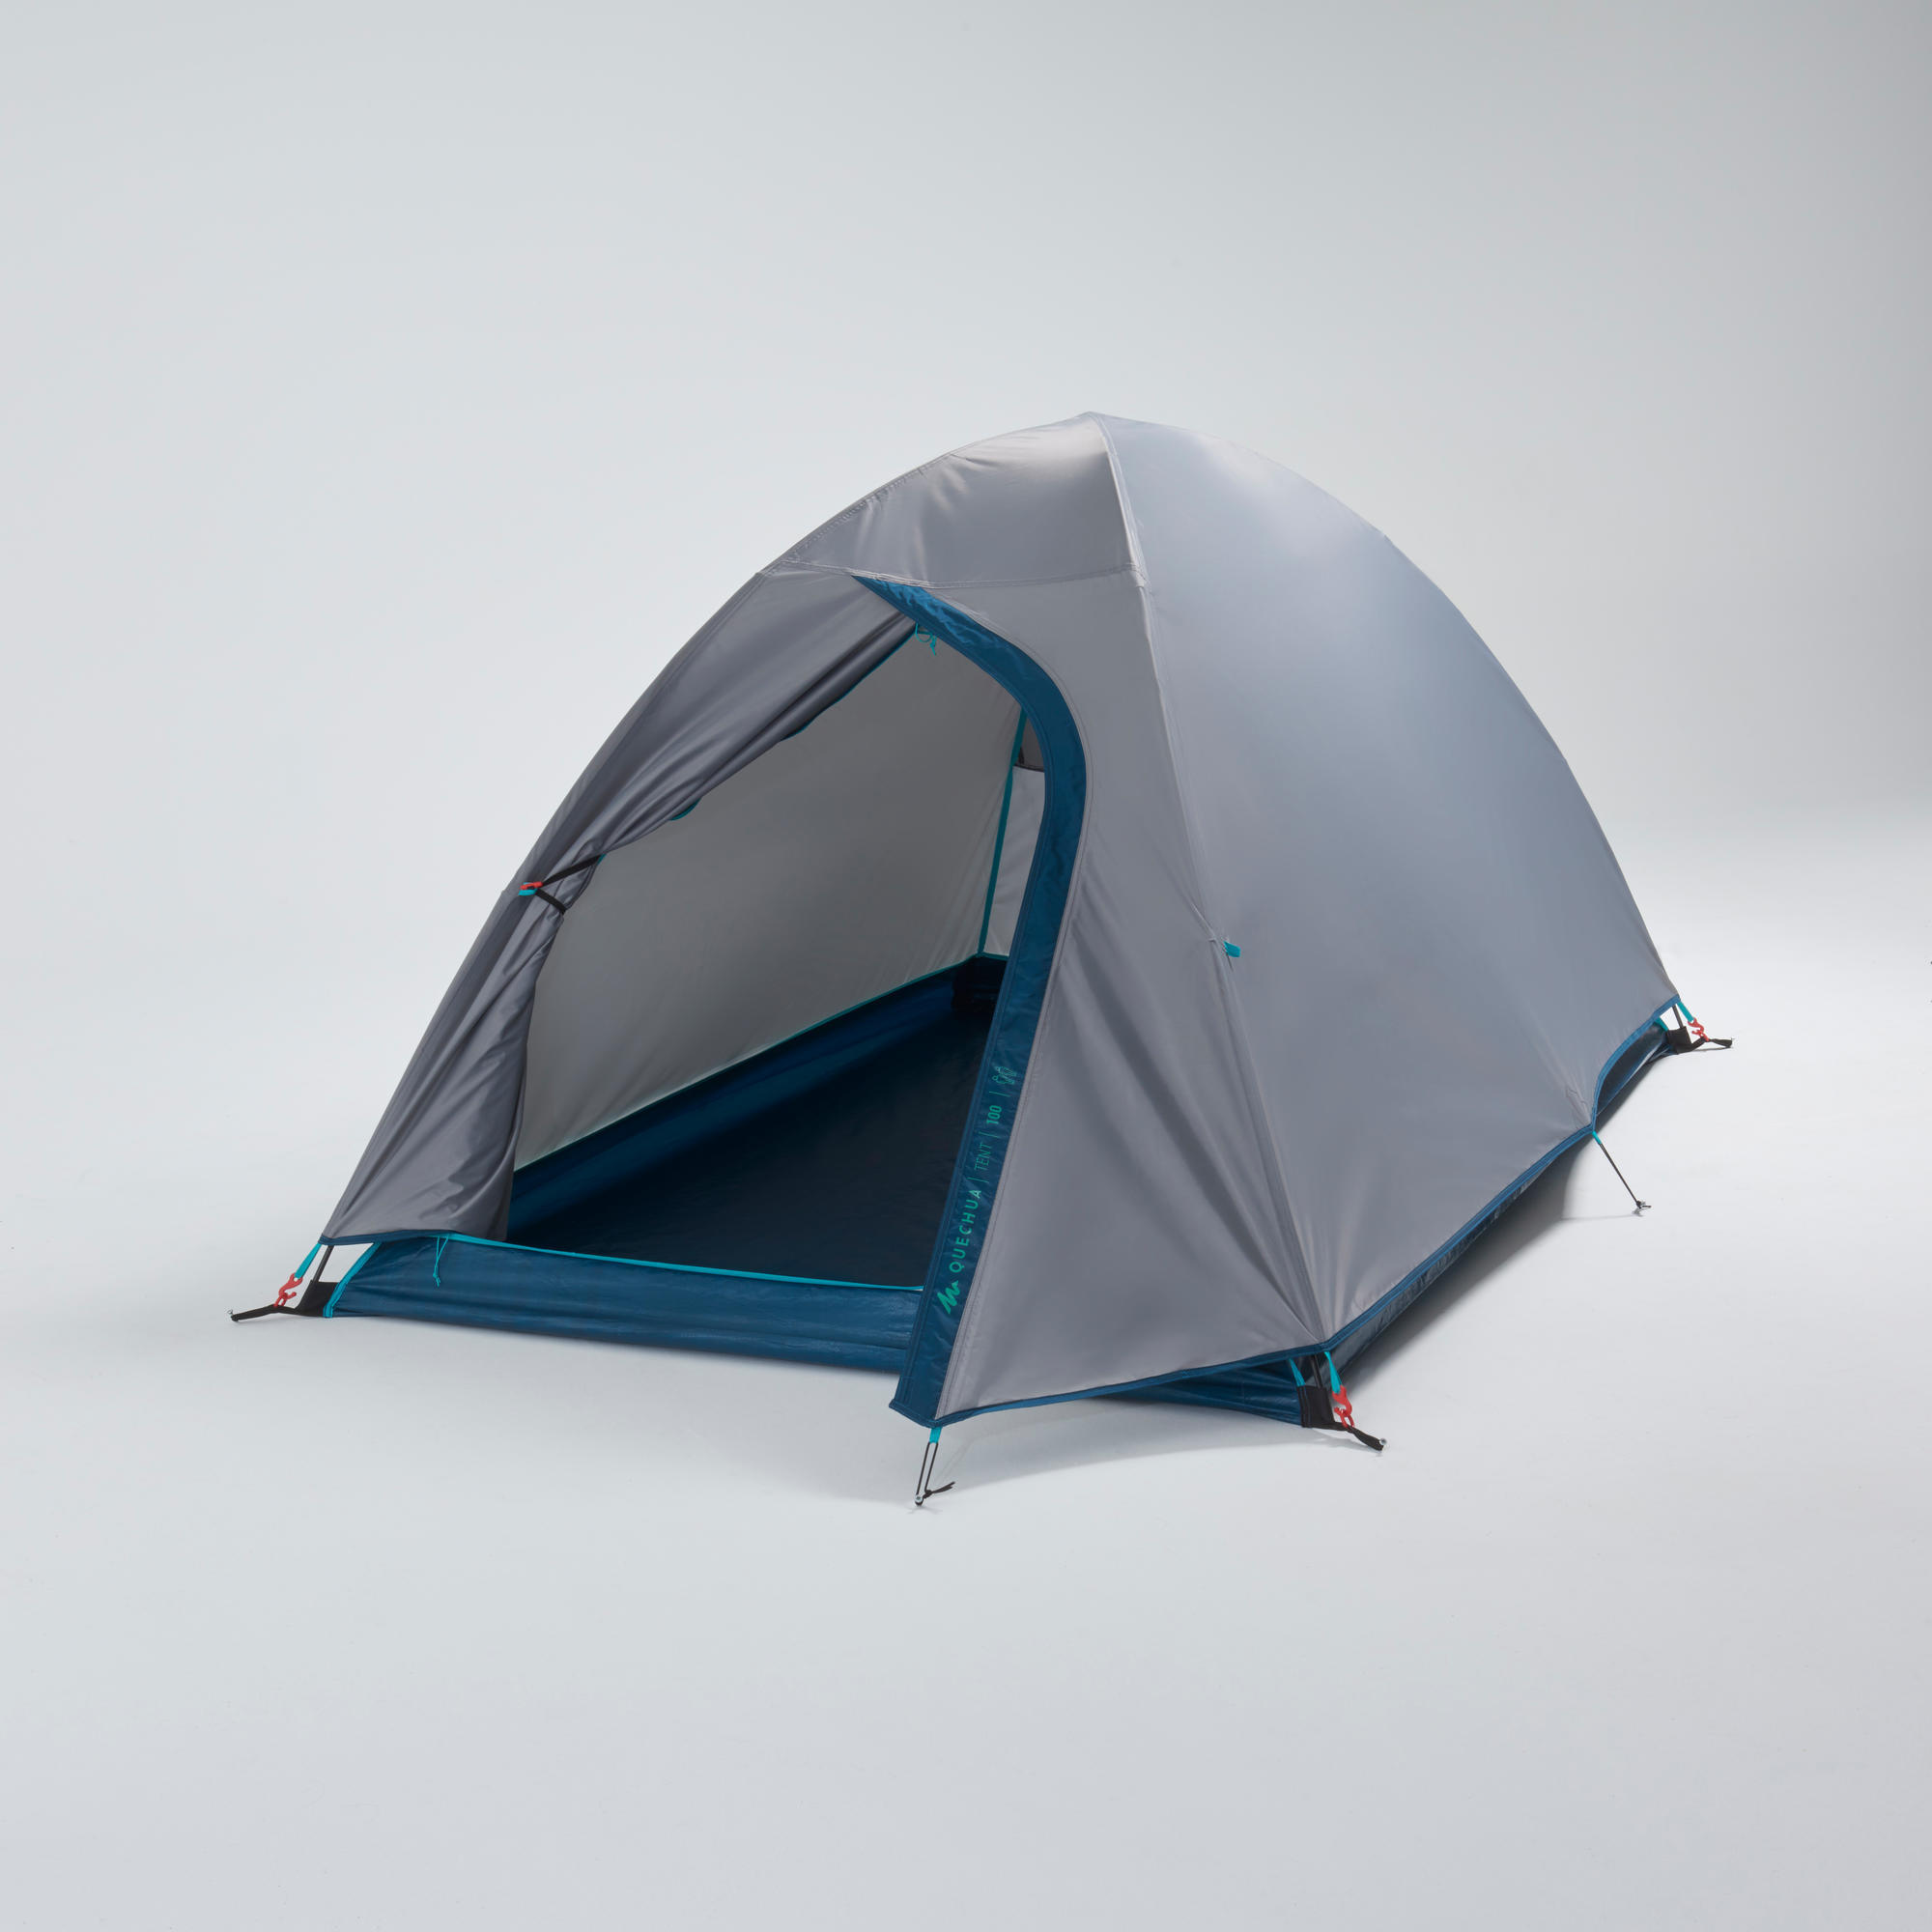 CAMPING TENT MH100 - 2 PERSON - Decathlon